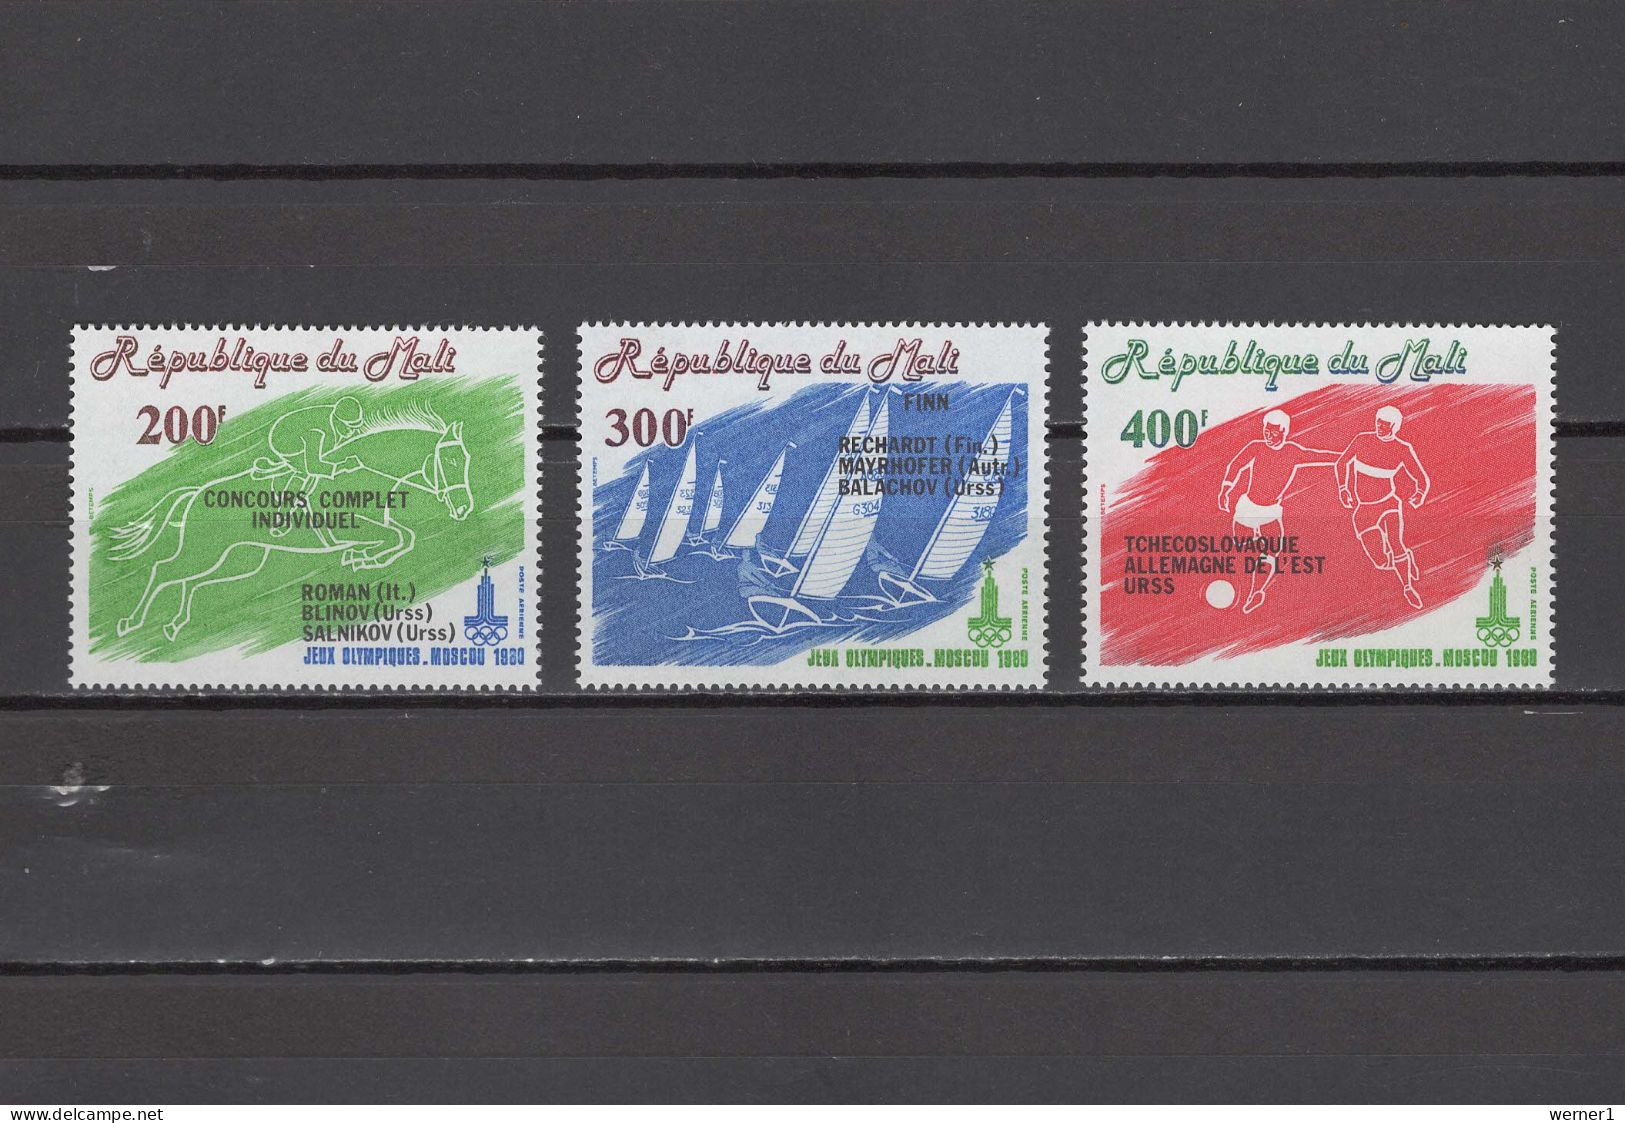 Mali 1980 Olympic Games Moscow, Equestrian, Sailing, Football Soccer Set Of 3 With Winners Overprint MNH - Zomer 1980: Moskou